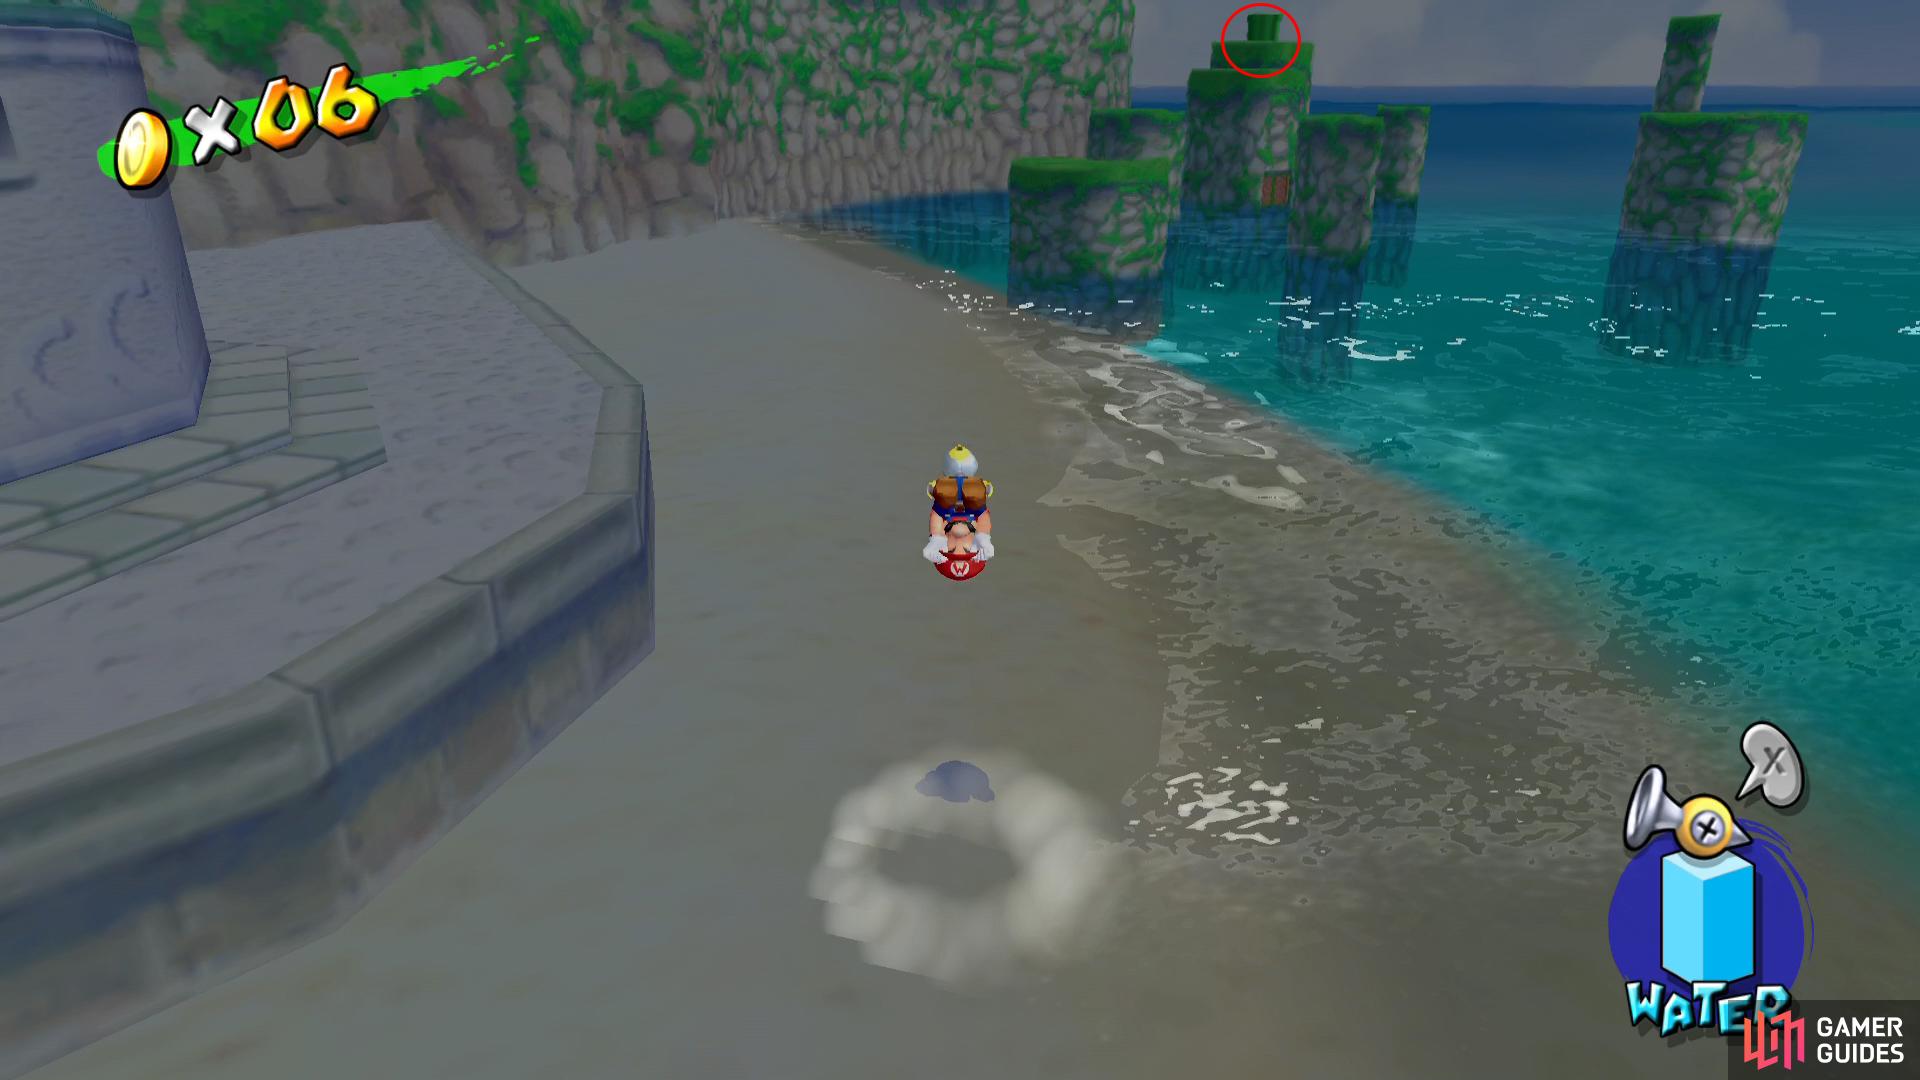 Return to the beach and take the Warp Pipe in the corner